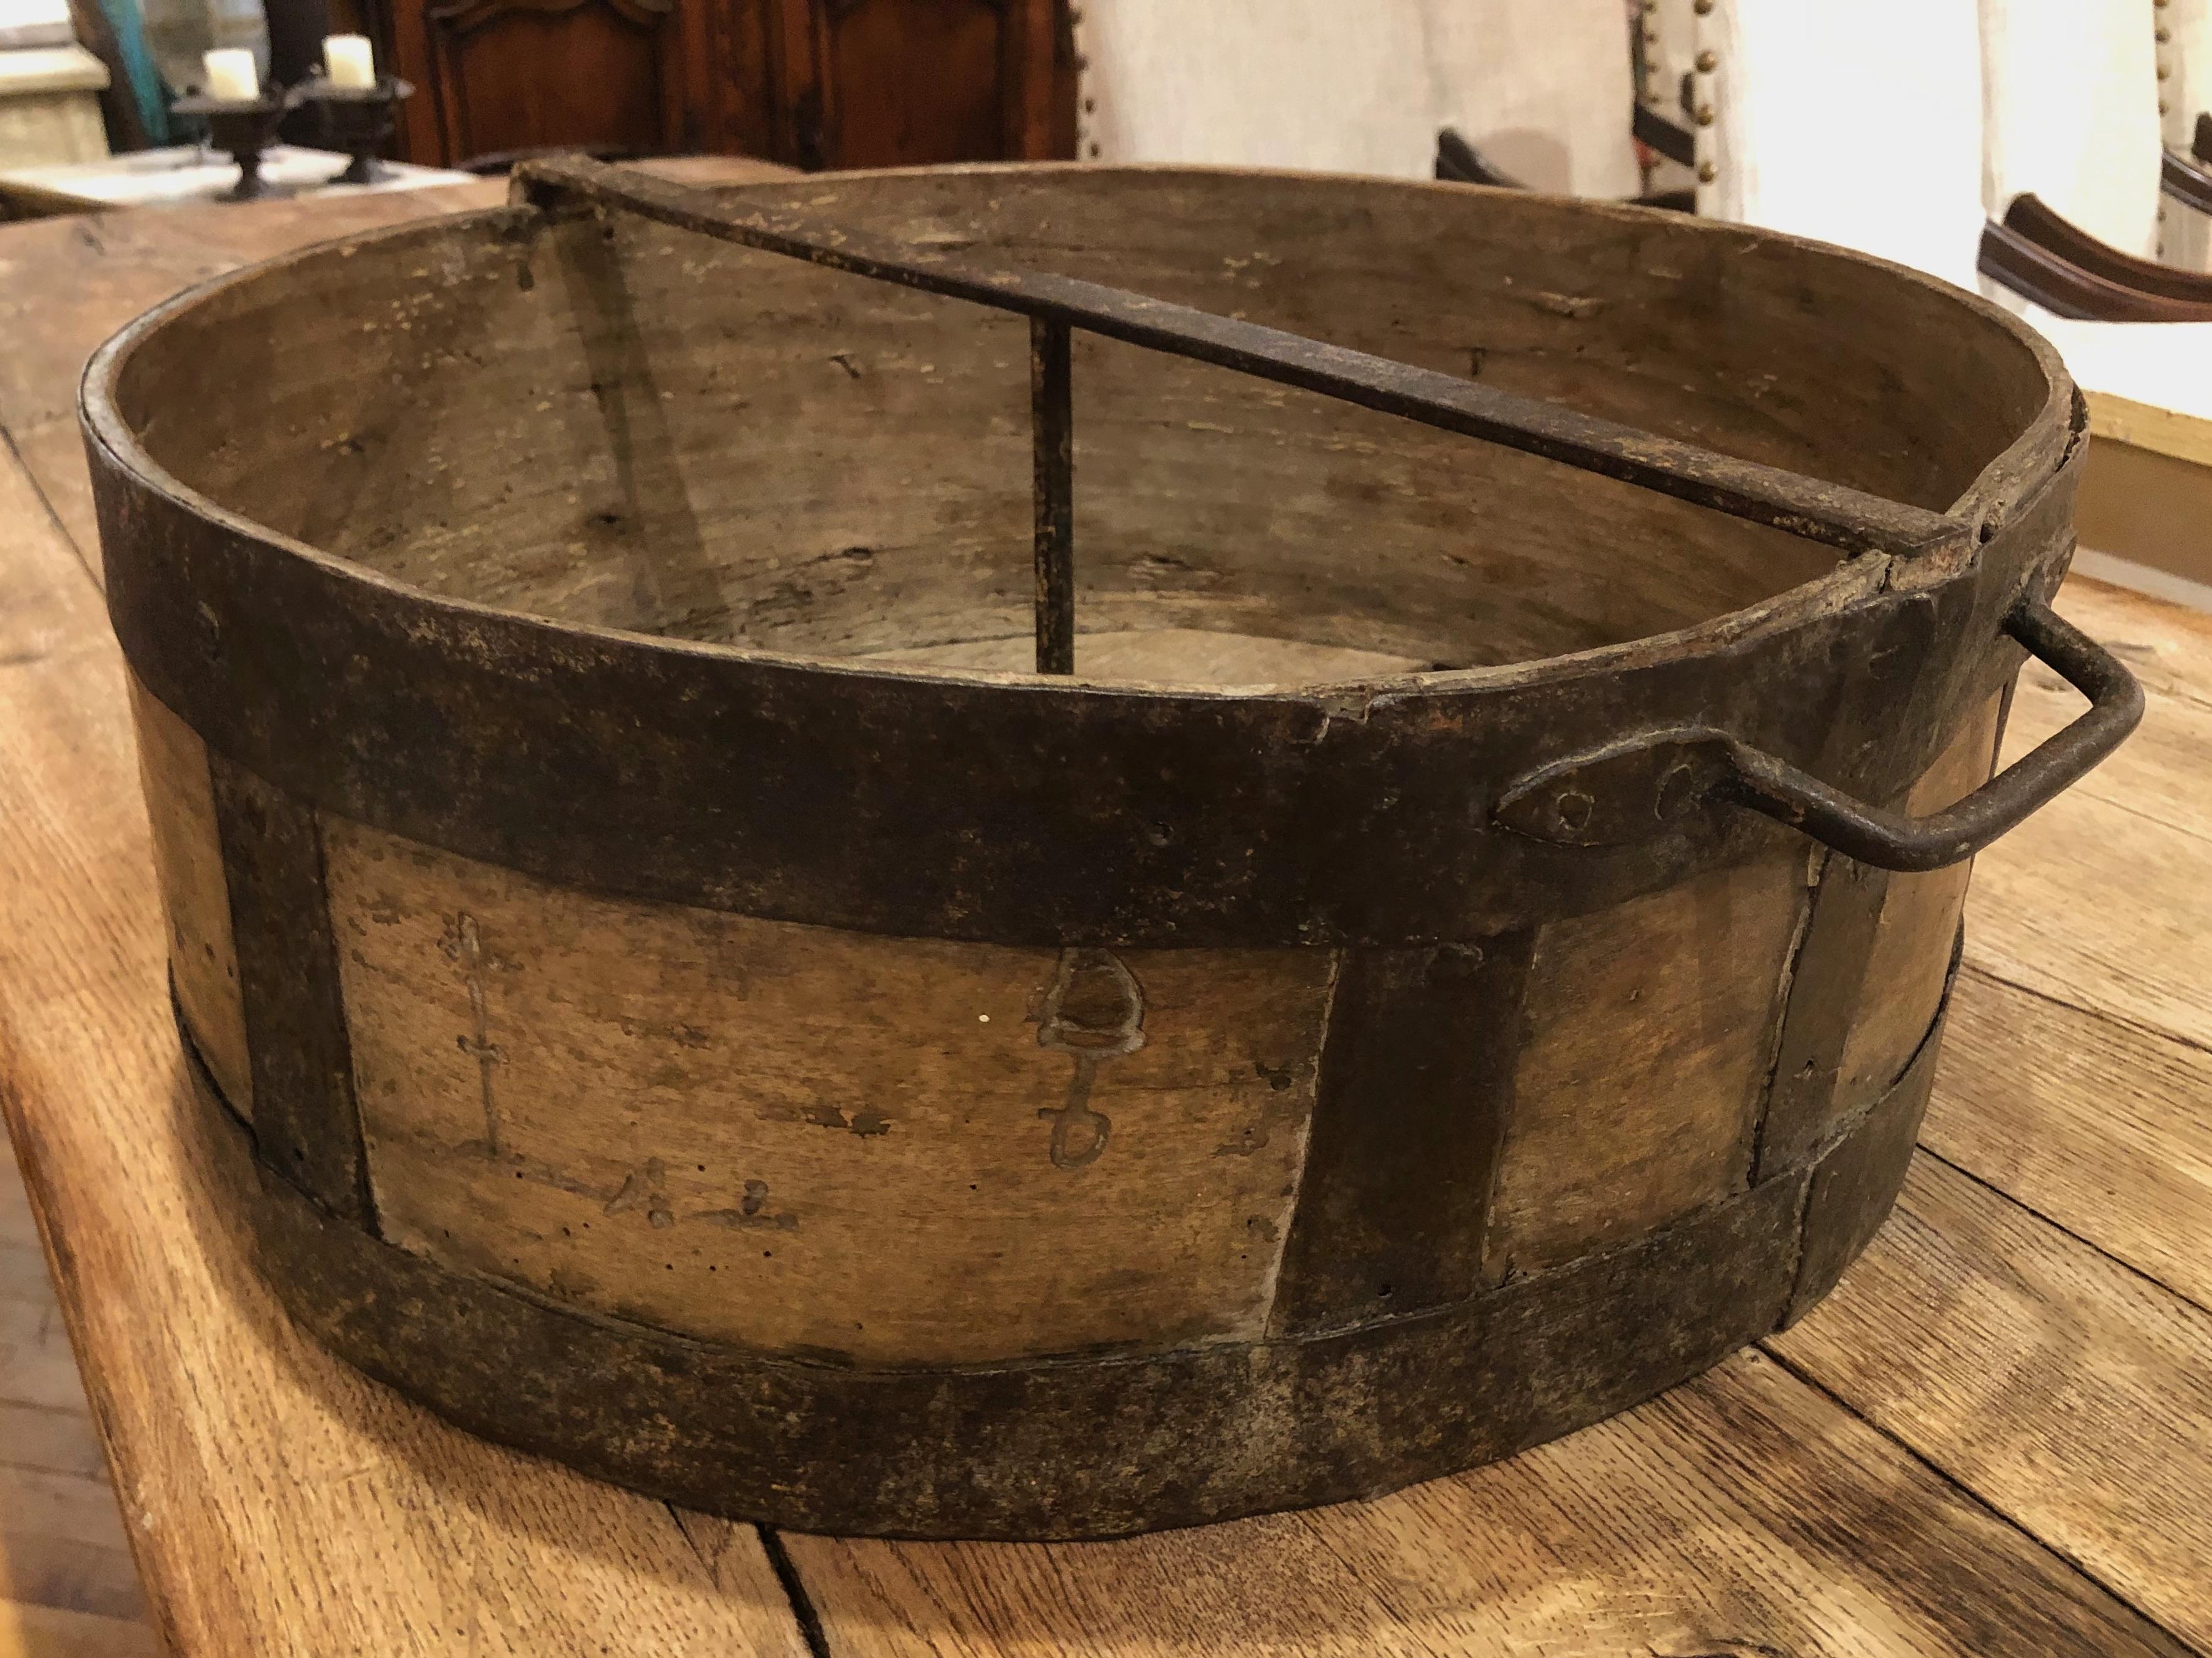 This early 19th century French Provincial cheese press is great decorative accessory for country style kitchens. Made of sycamore, reinforced with hand wrought steel and original patination, it is a great piece to accent your decor.
Burgundy, circa